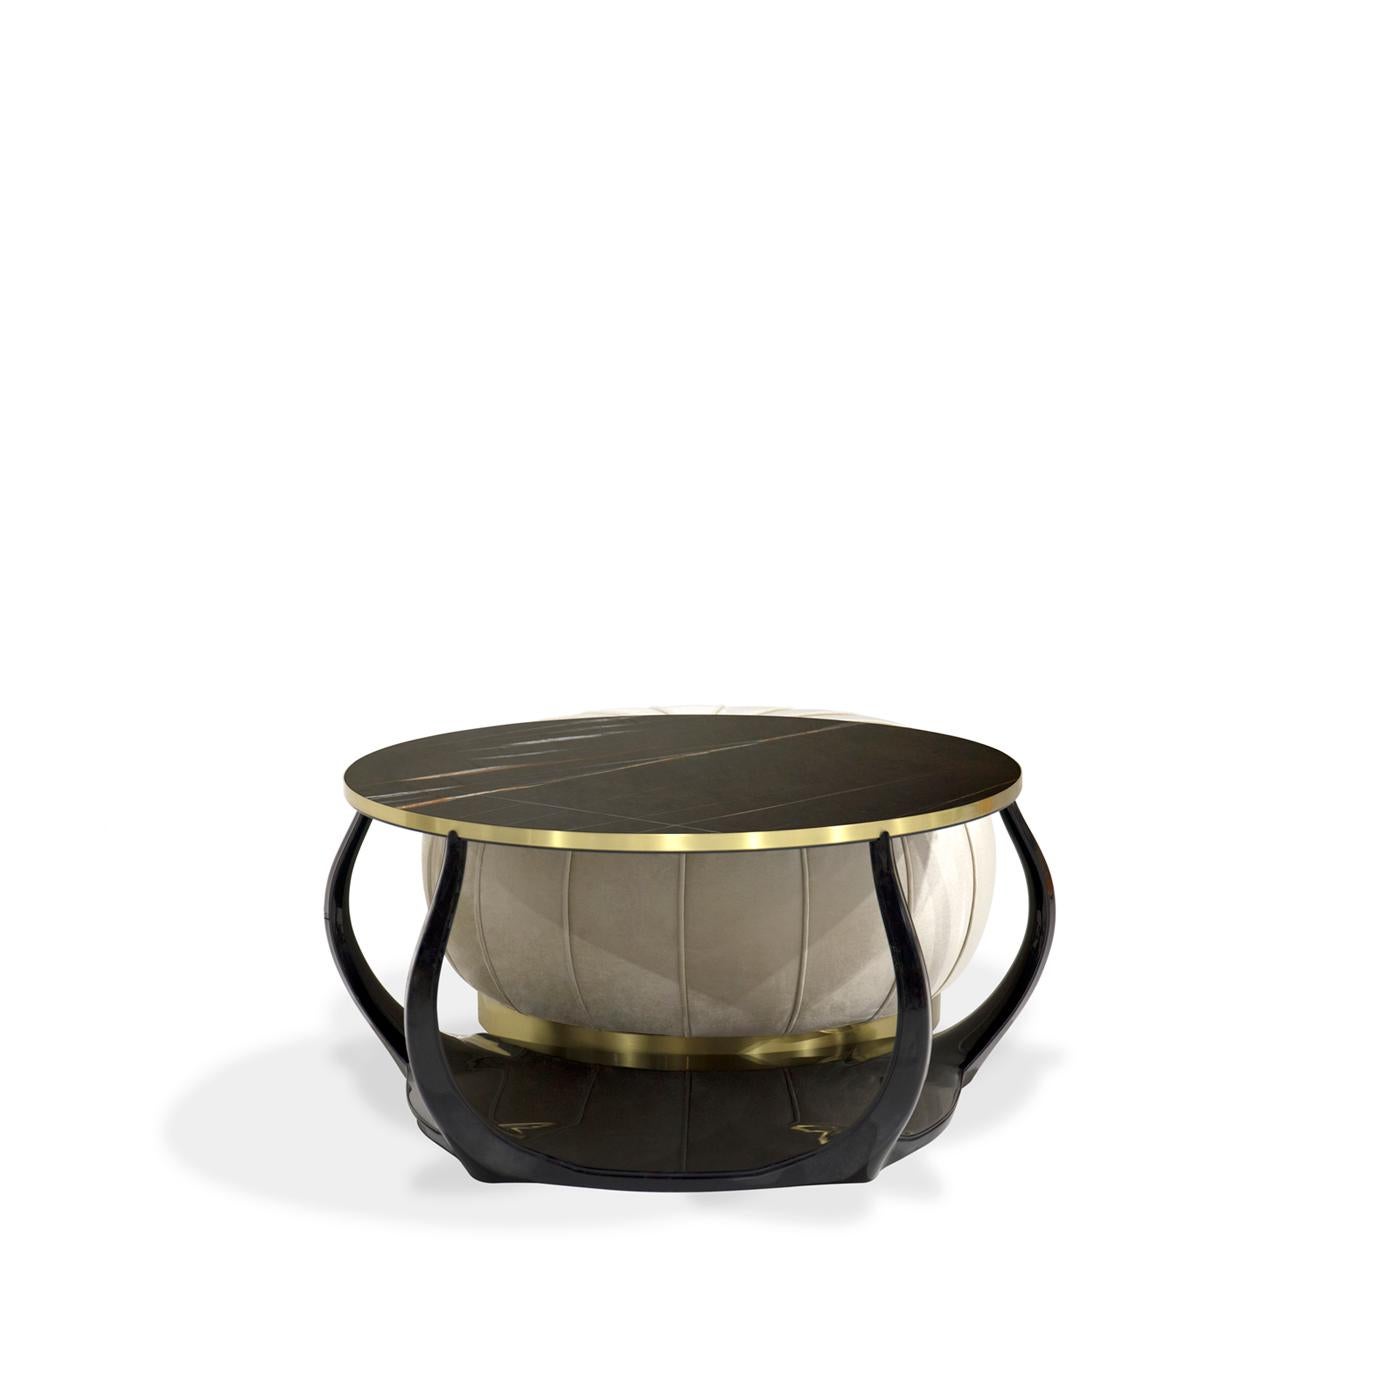 High gloss black lacquered limbs clasp a Sahara Noir marble top and a seamed round upholstered ottoman with a polished brass base to compose the intriguing Embrace cocktail table ottoman combo.